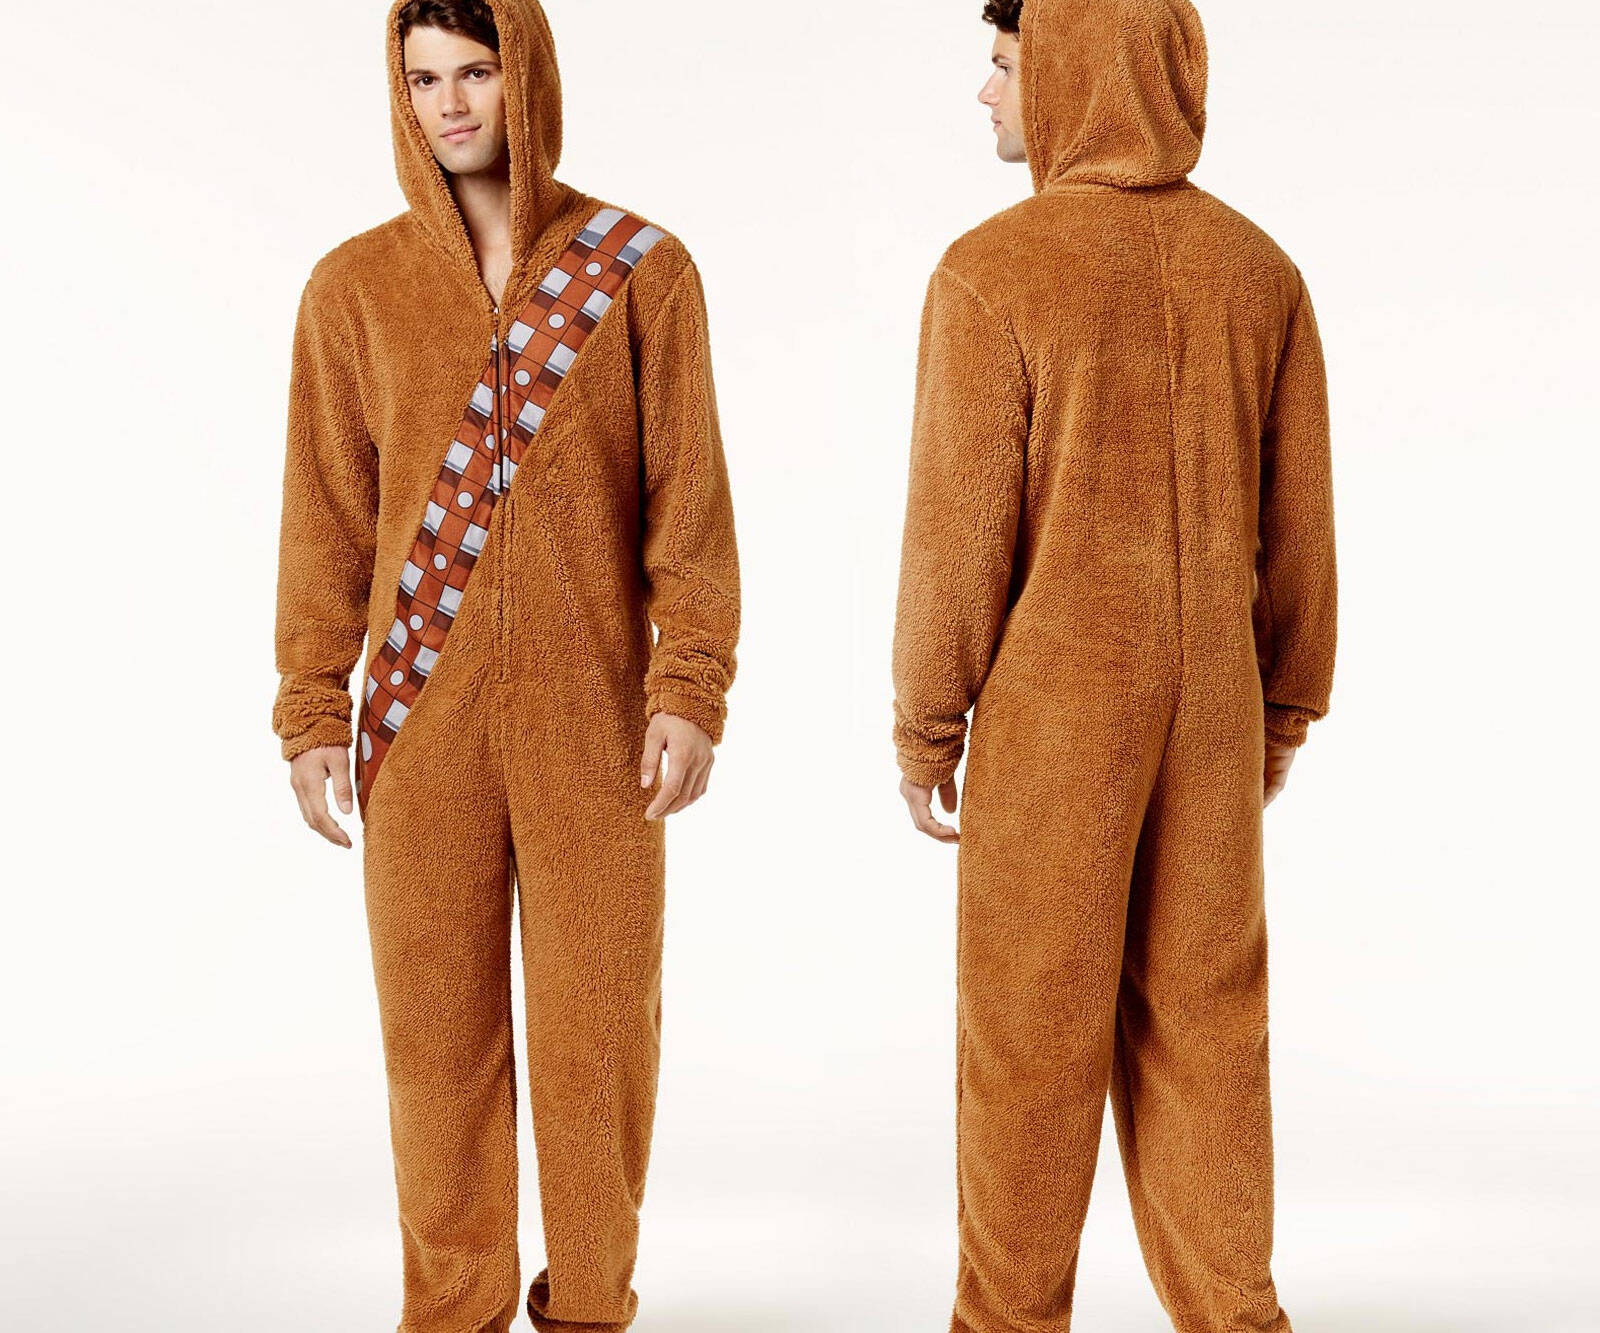 Chewbacca Adult Onesie - coolthings.us